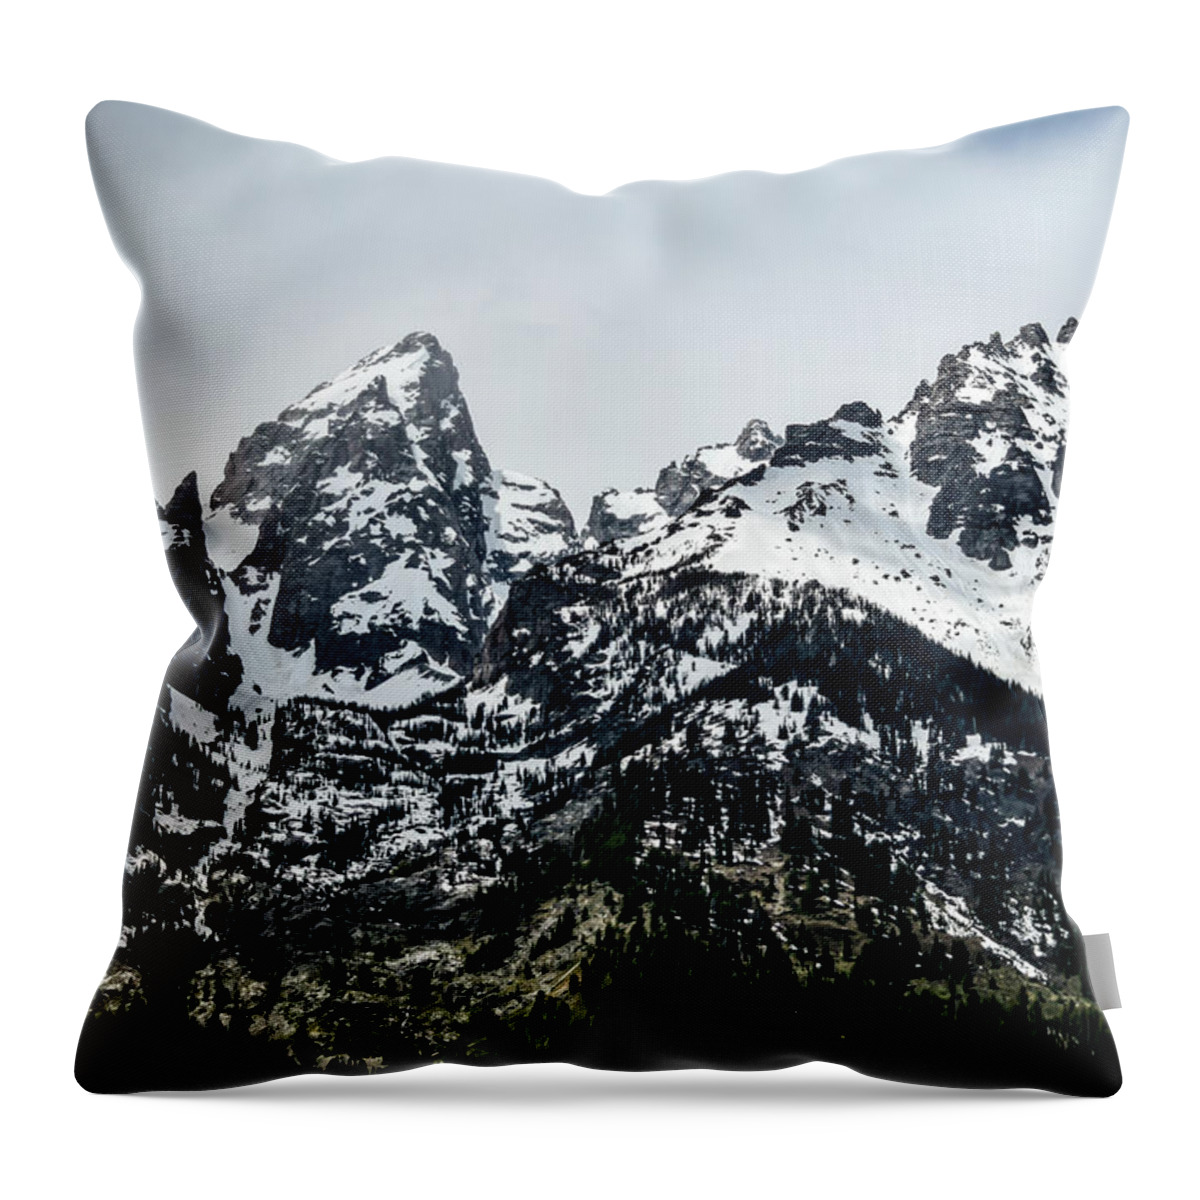 Grand Teton National Park Images Throw Pillow featuring the photograph Wyoming Grand Teton Photography 20180521-194 by Rowan Lyford